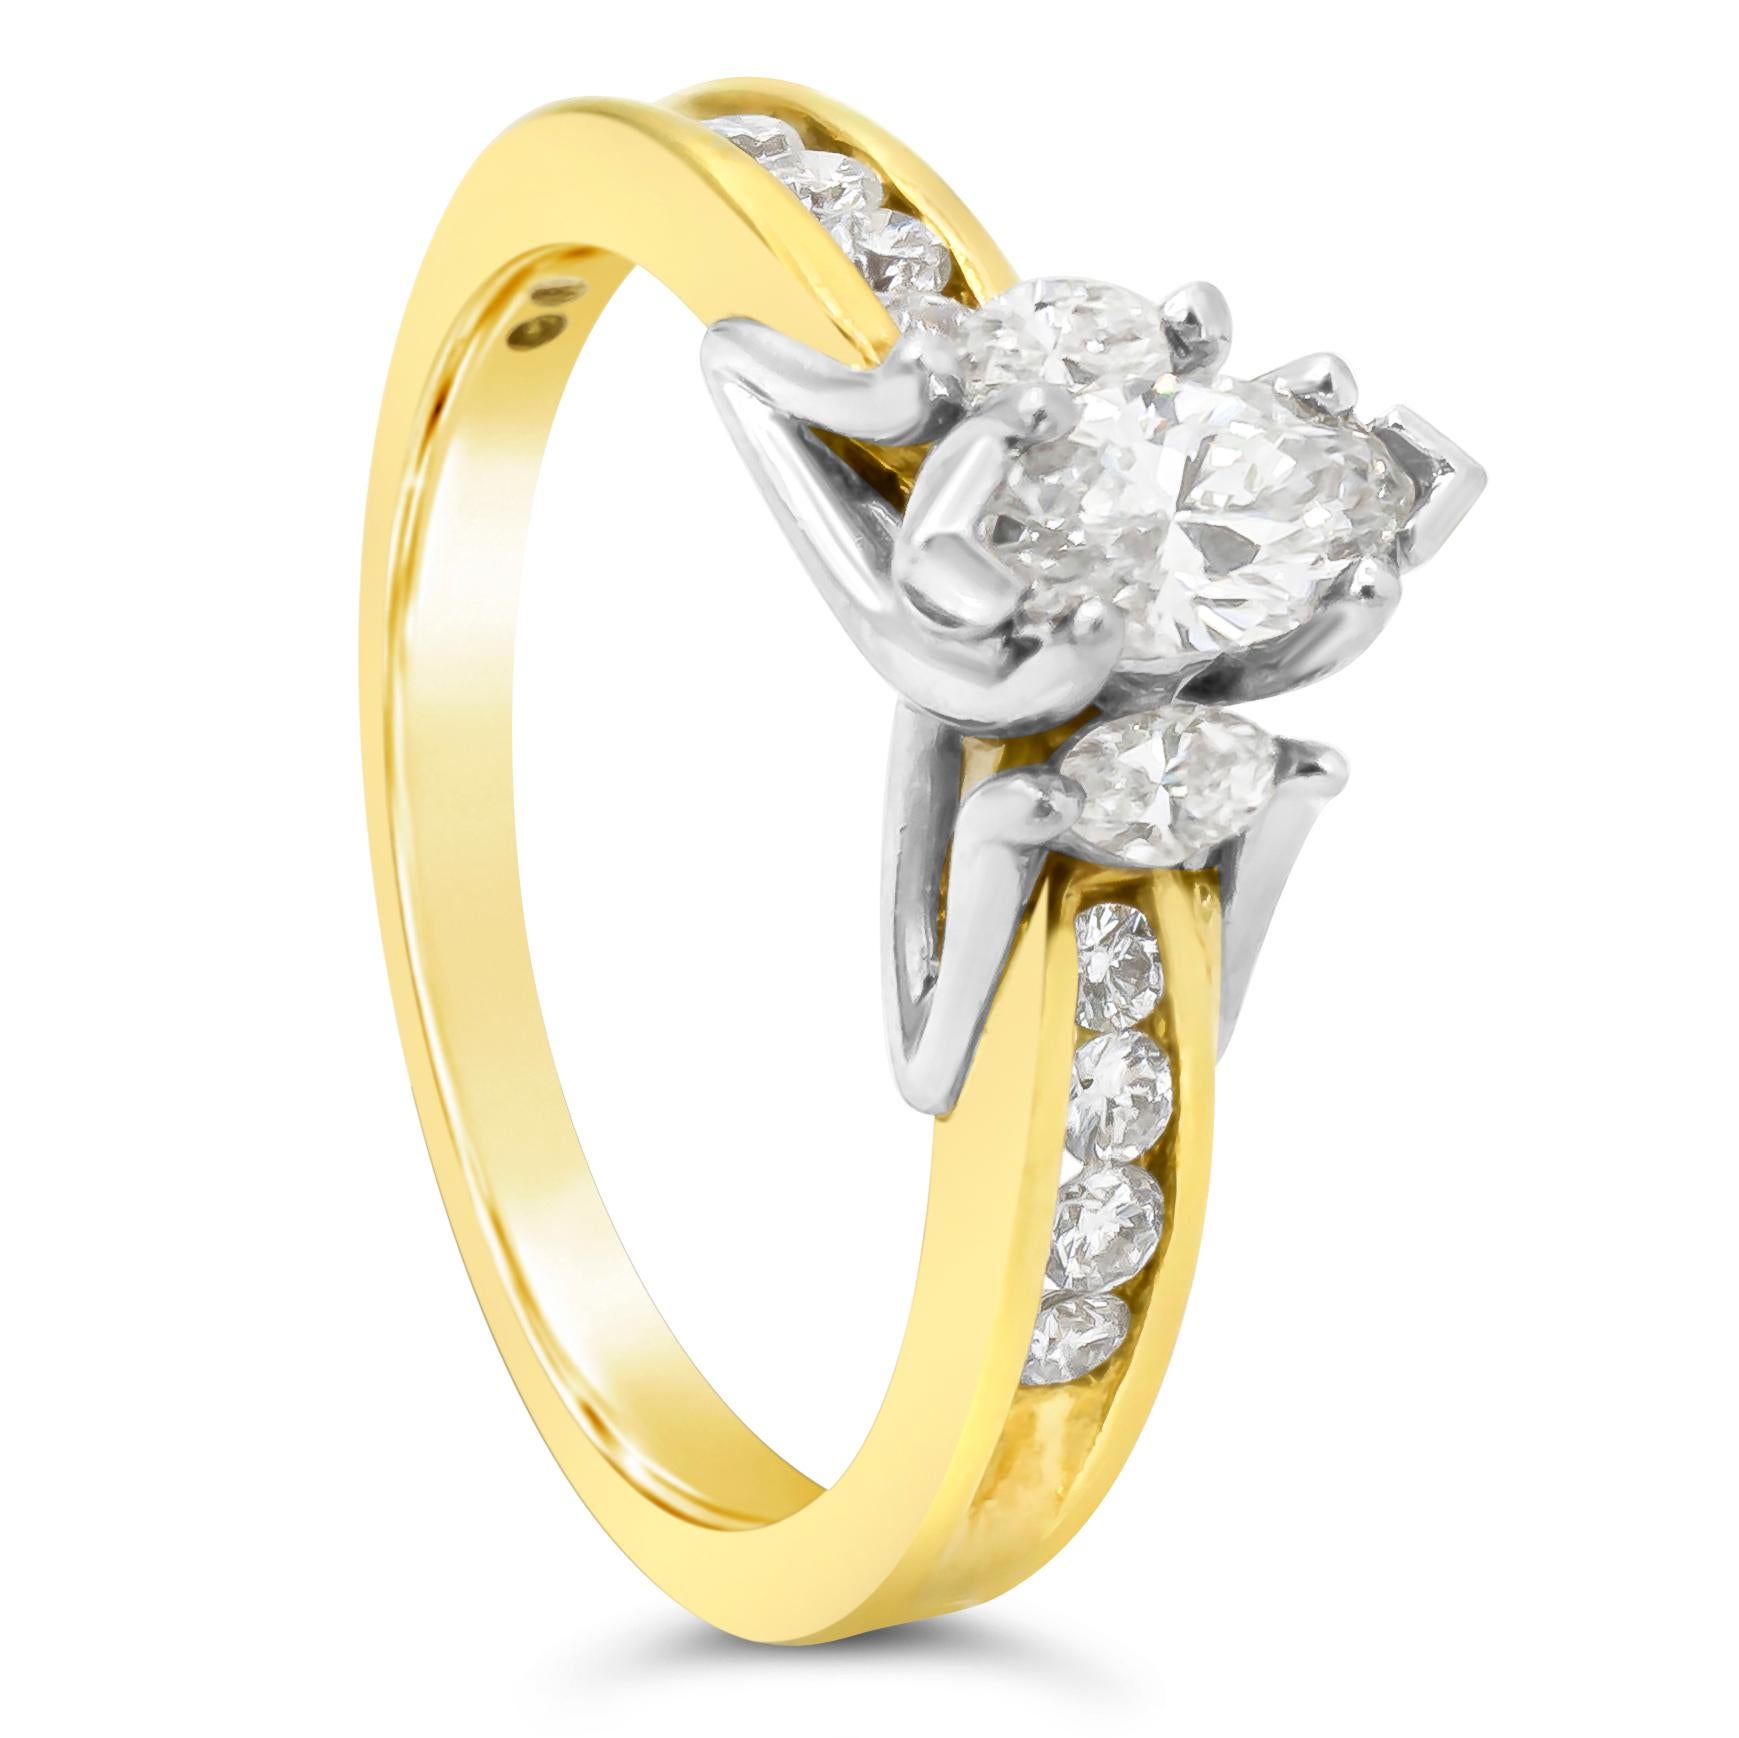 This chic and unique engagement ring showcases 0.32 carats marquise cut diamond center stone, set in a classic four prong basket setting. Flanked by tow melee marquise cut diamonds on each side and accented by brilliant round melee diamonds that